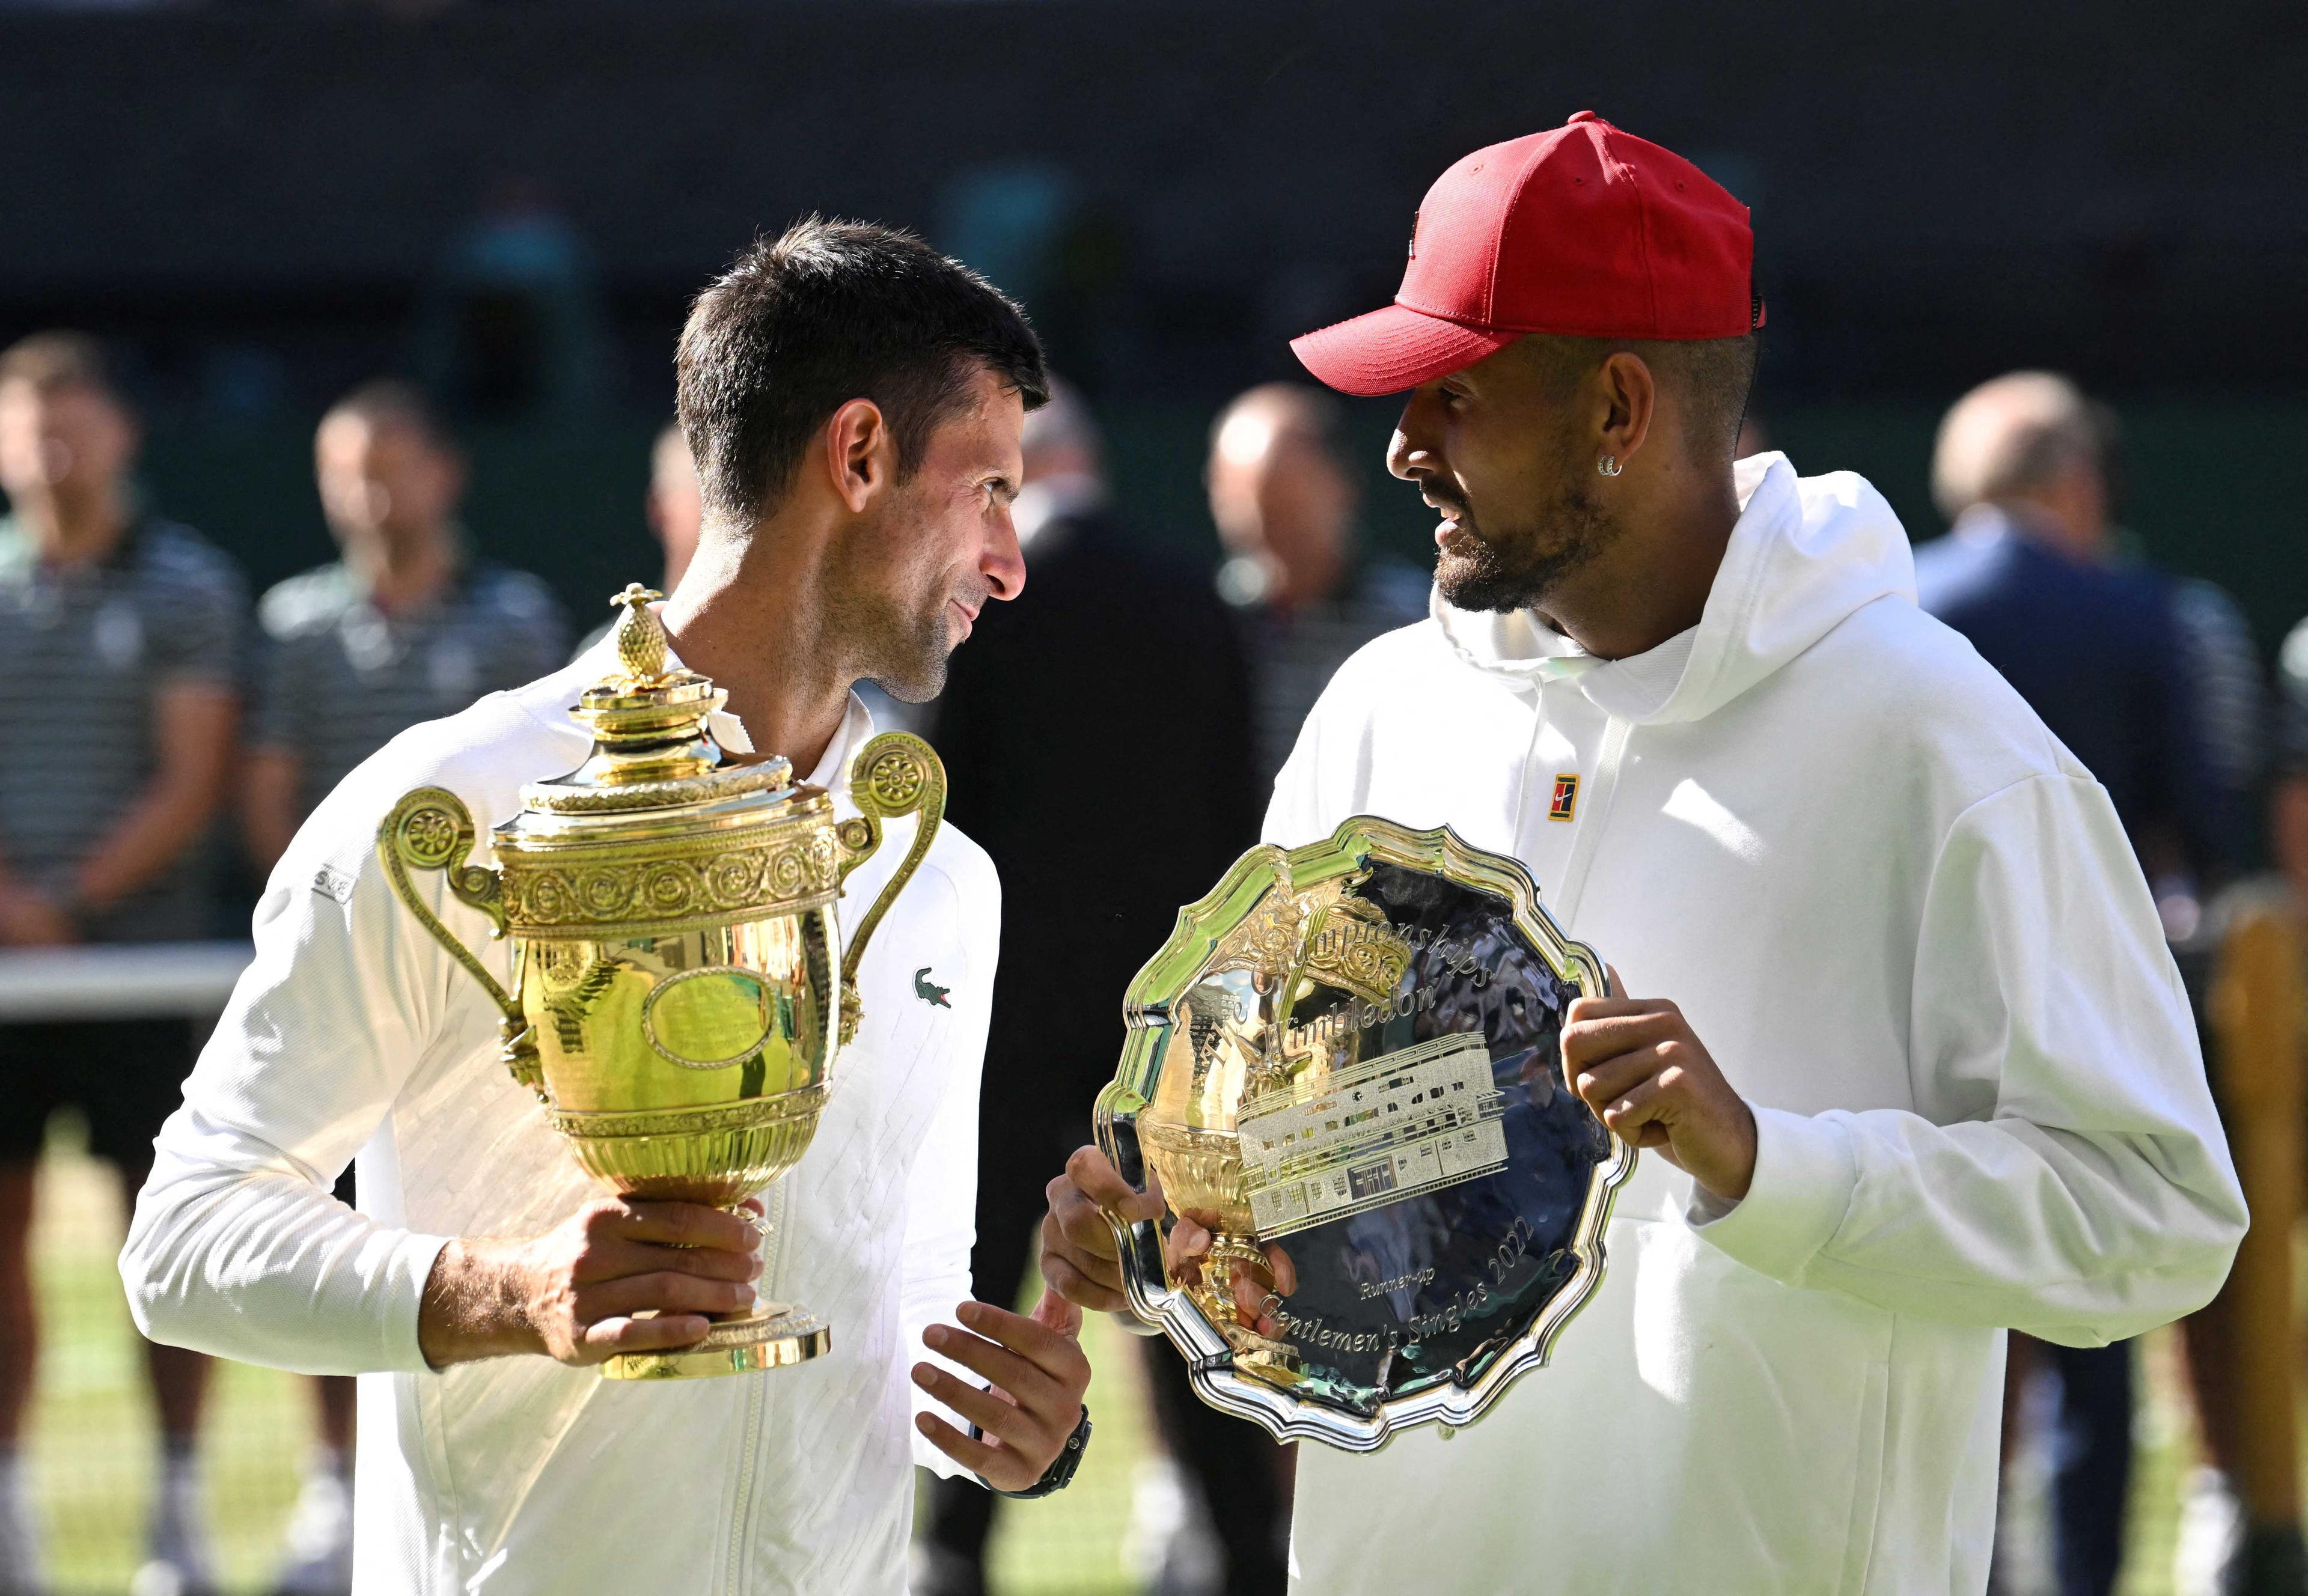 Serbia's Novak Djokovic poses with the trophy after winning the Wimbledon men's singles final alongside runner up Australia's Nick Kyrgios, July 2022. Photo: Reuters